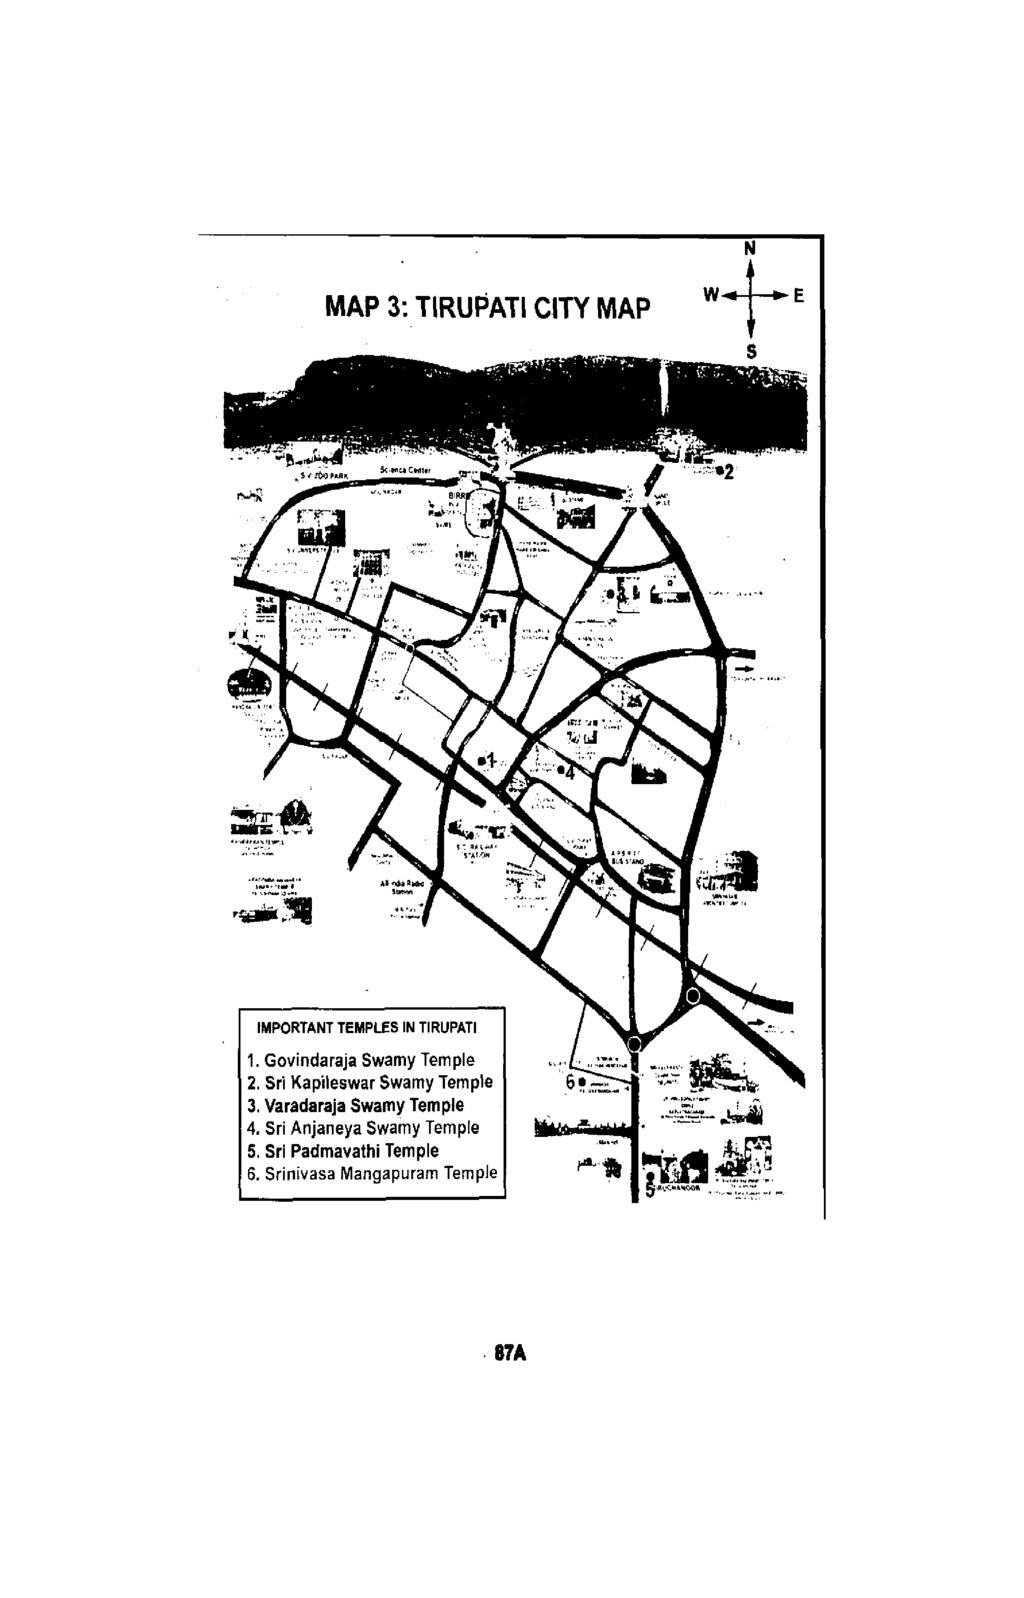 .-+ MAP 3: T~RUF~AT~ CITY MAP IMPORTANT TEMPLES IN TlRUPATl 1. Govindaraja Swamy Temple 2.